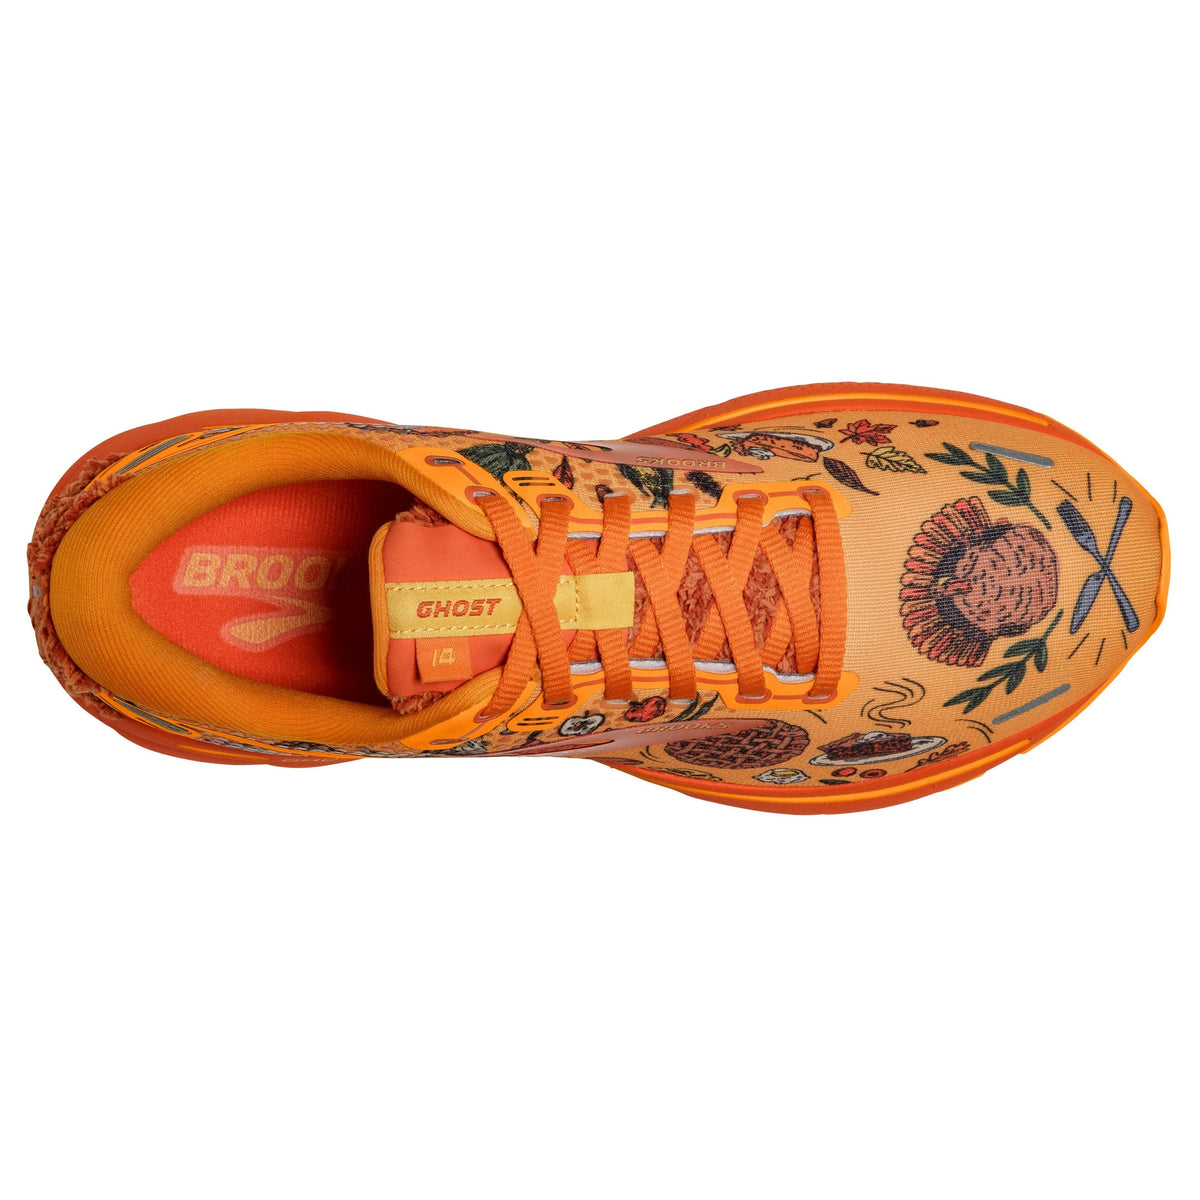 Top view of a brightly colored Brooks Ghost 14 Citrus/Gold Flame/Orangeade women&#39;s running shoe with a floral pattern design, featuring advanced cushioning technology.